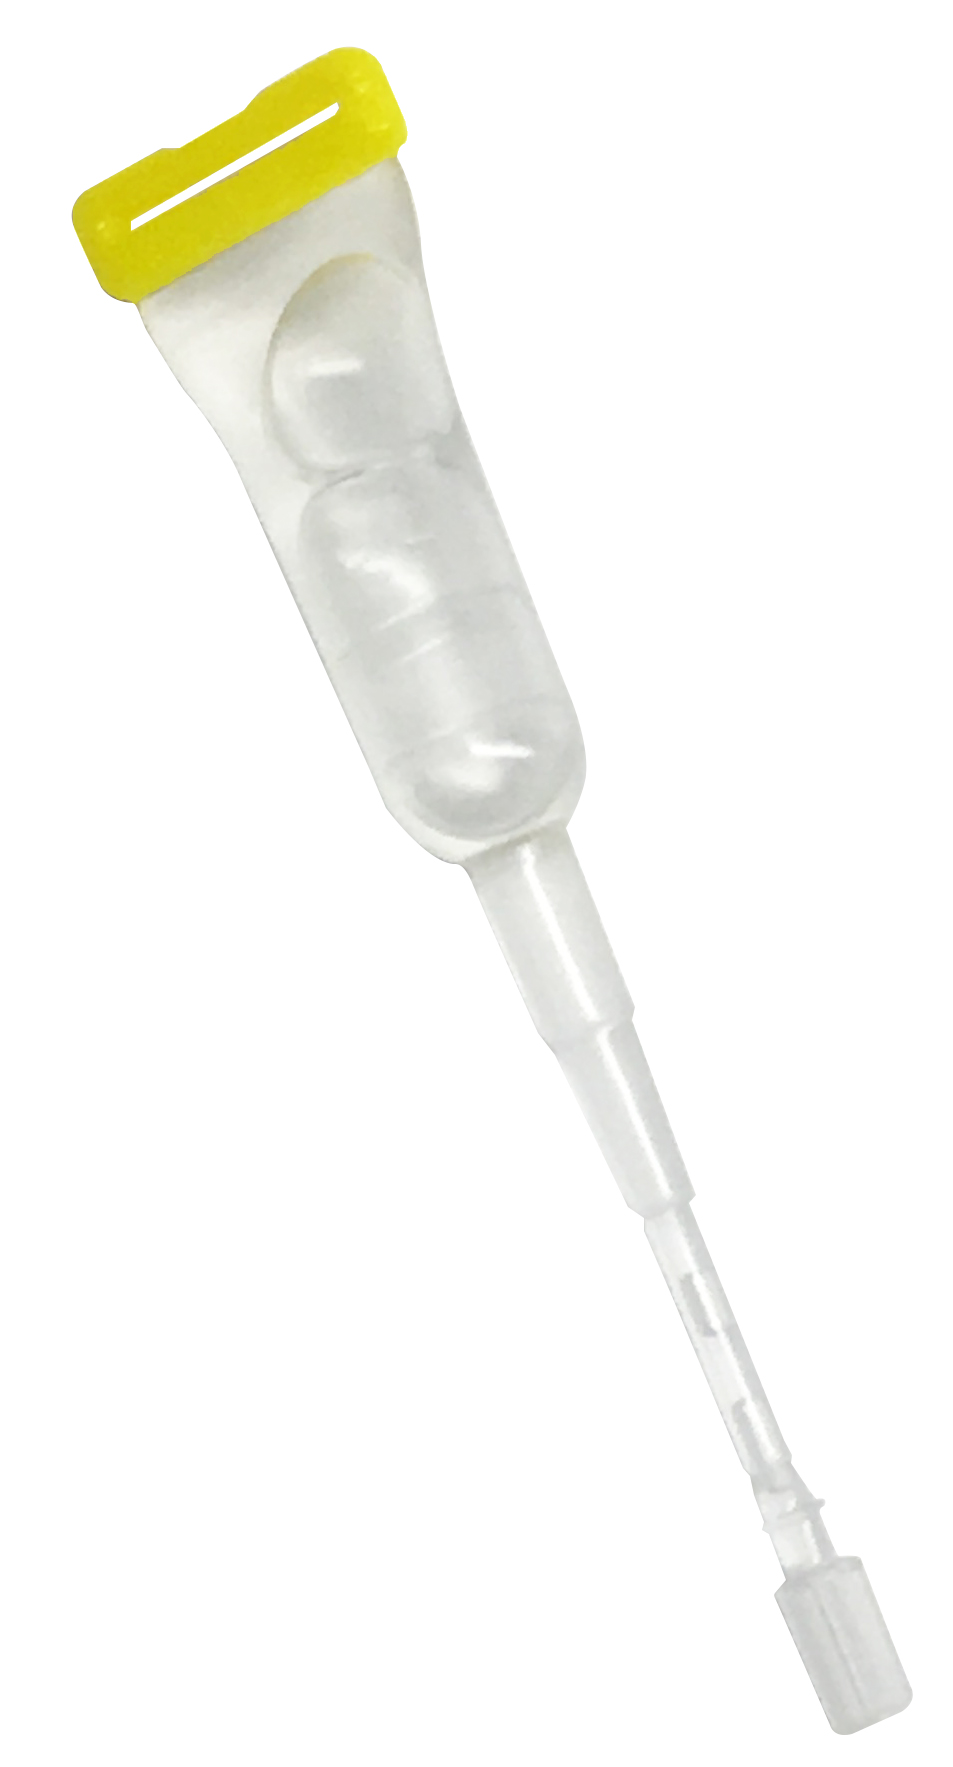 101-TISSUE LINK TISSUELINK CLEAR - TISSUE ADHESIVE